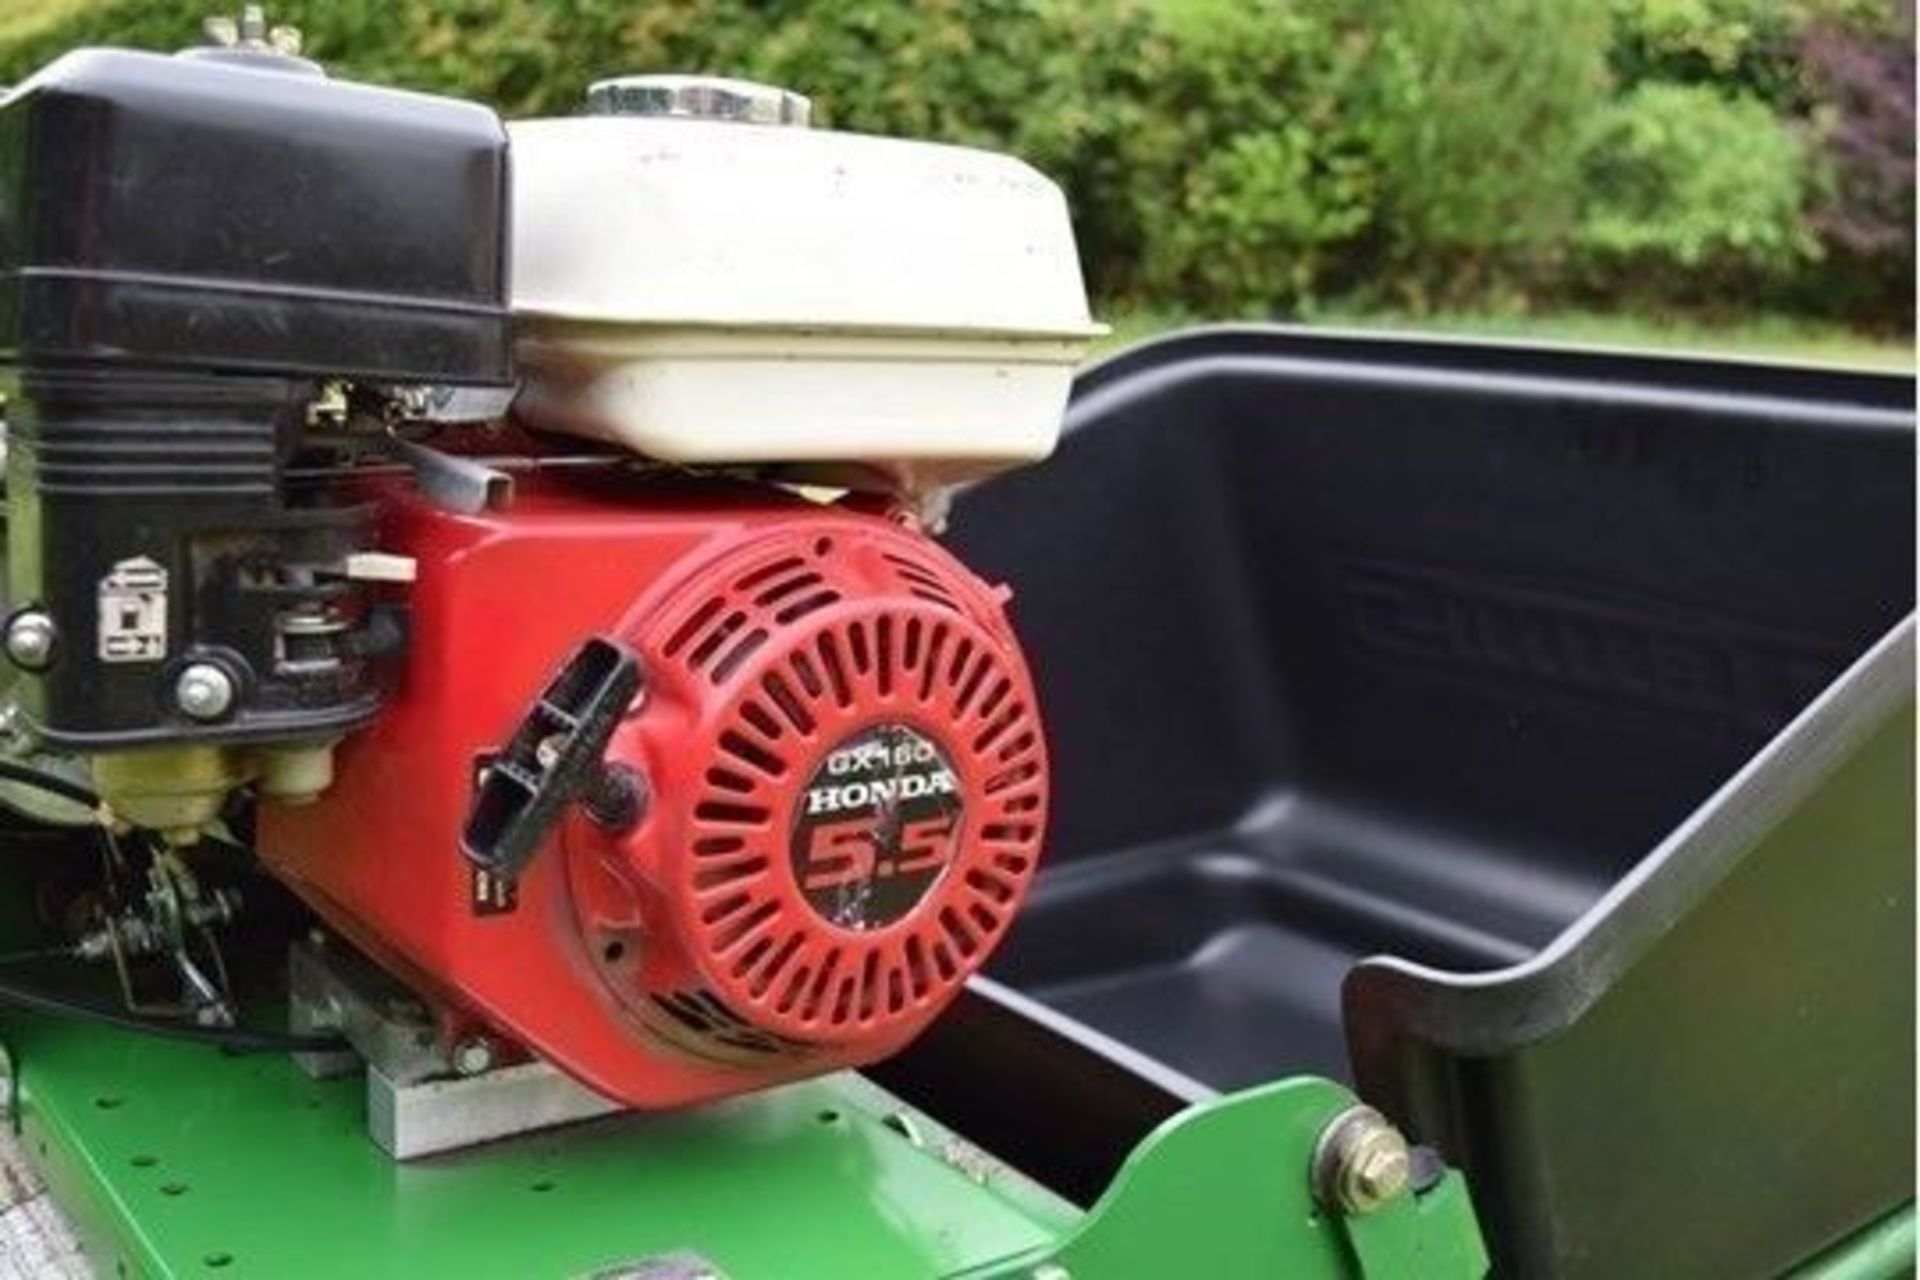 2004 Dennis G560 5 Blade Cylinder Mower With Grass Box - Image 7 of 11